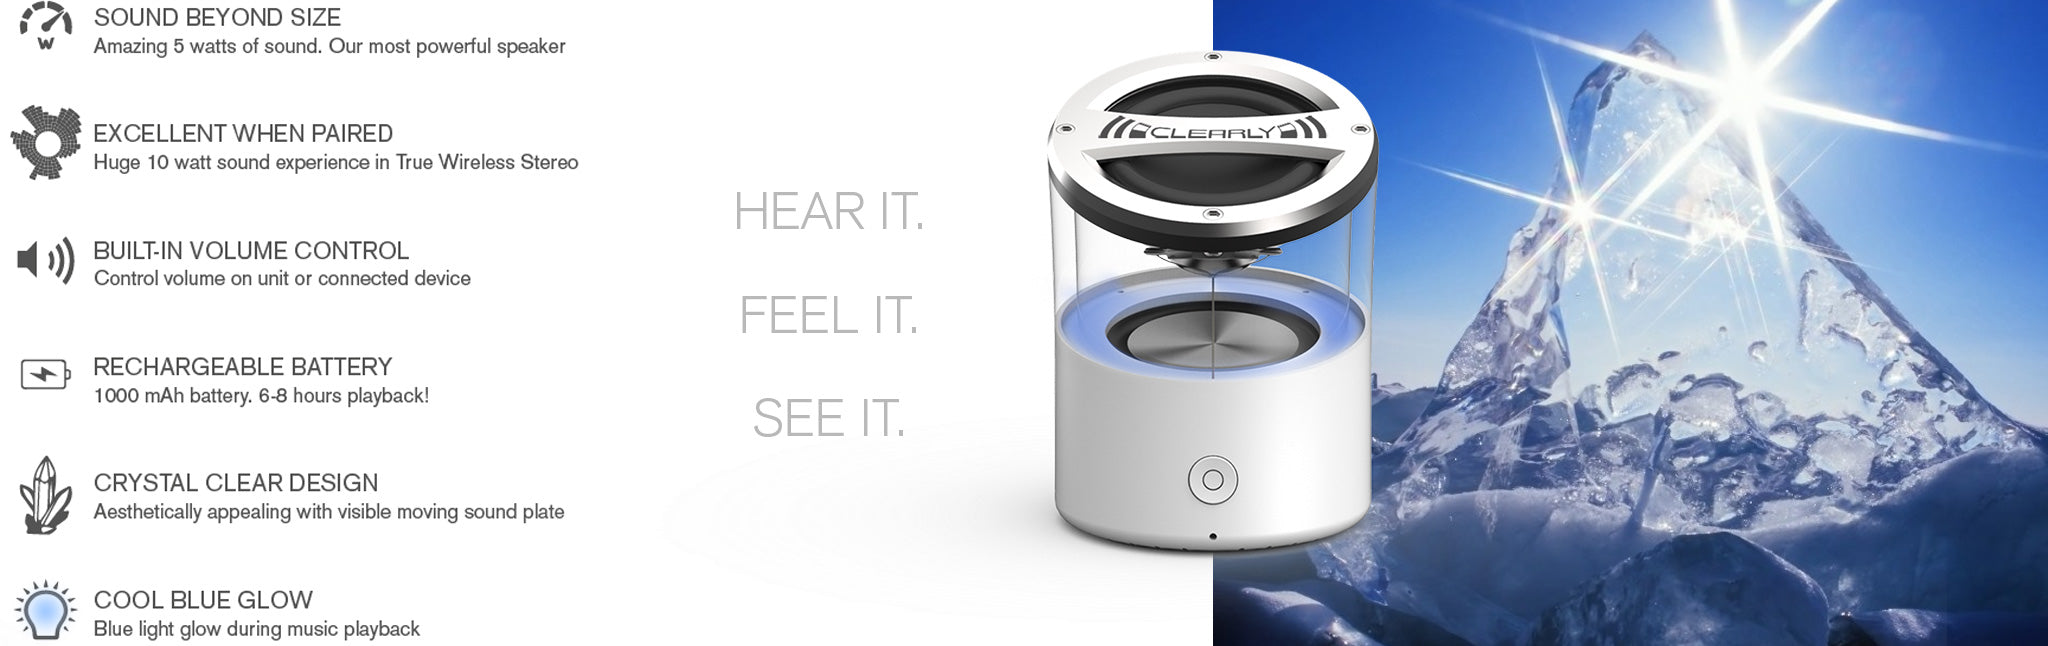 Clearly the most beautiful sound we offer. Hear it. Feel it. See it.